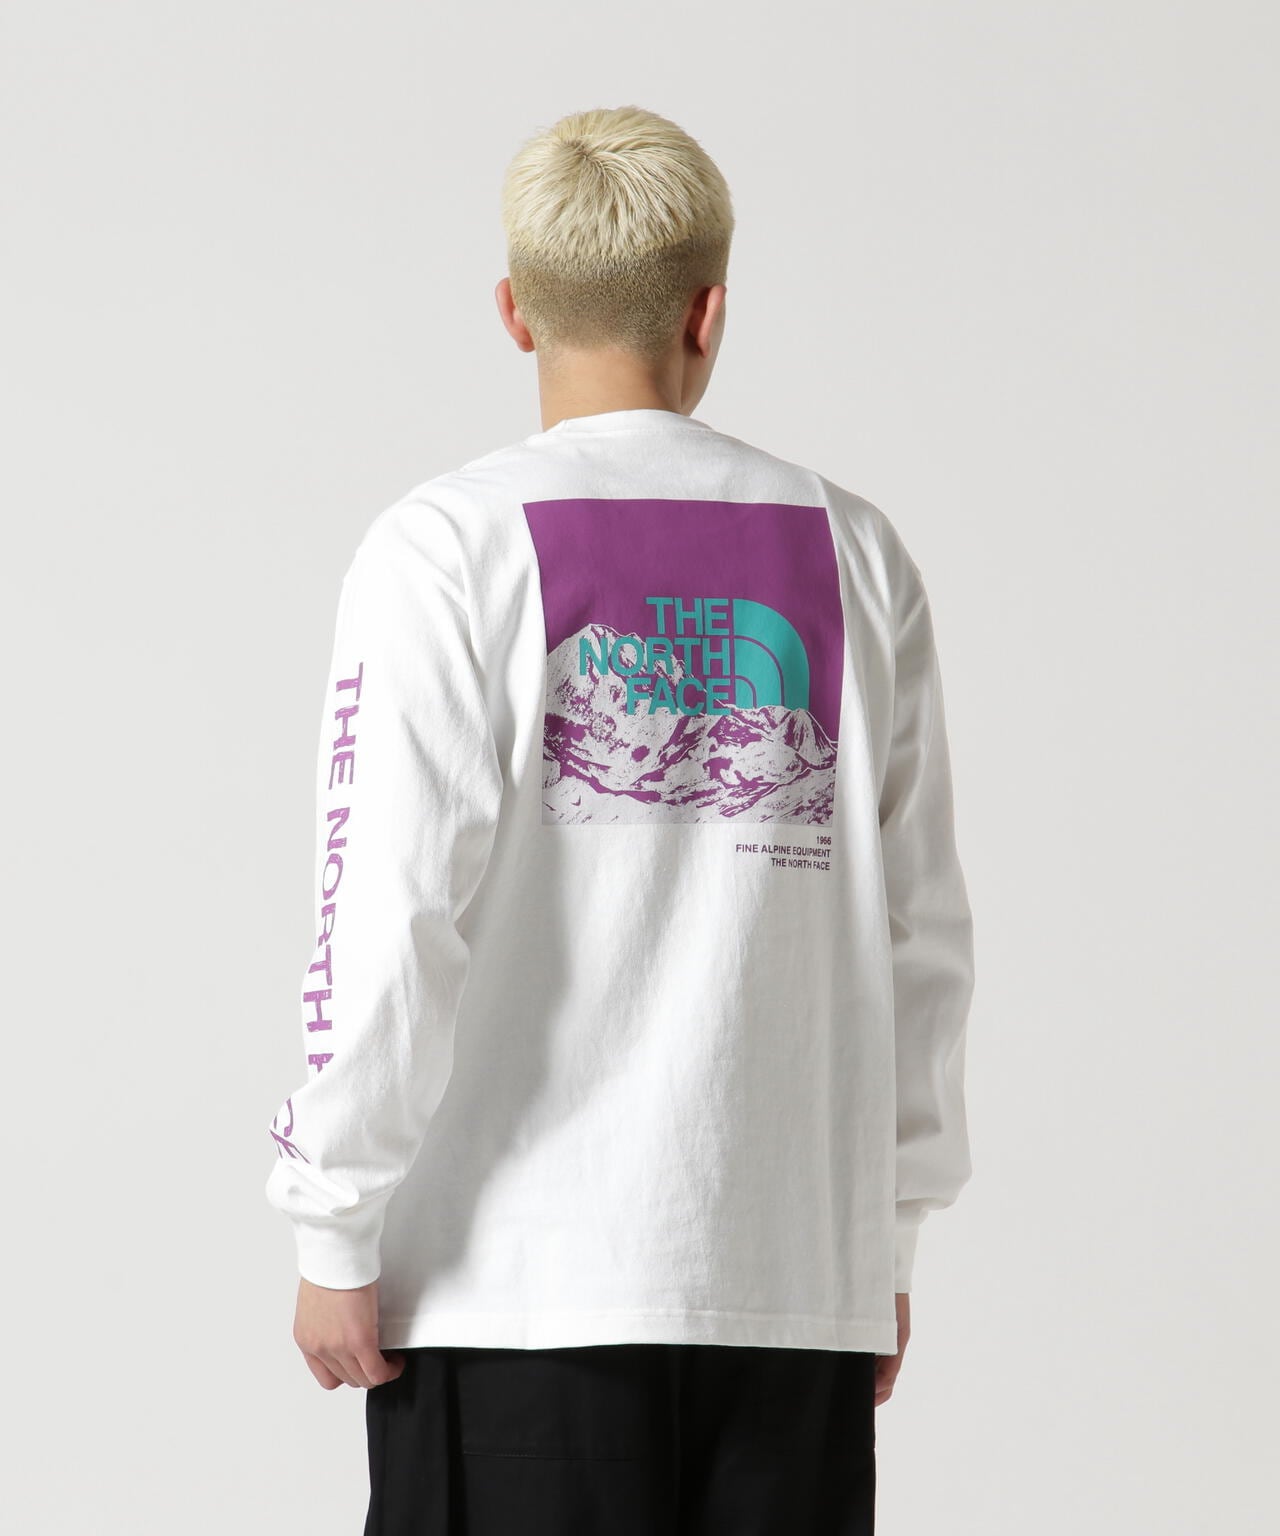 THE NORTH FACE (ザ・ノースフェイス）L/S Sleeve Graphic Tee | B'2nd 